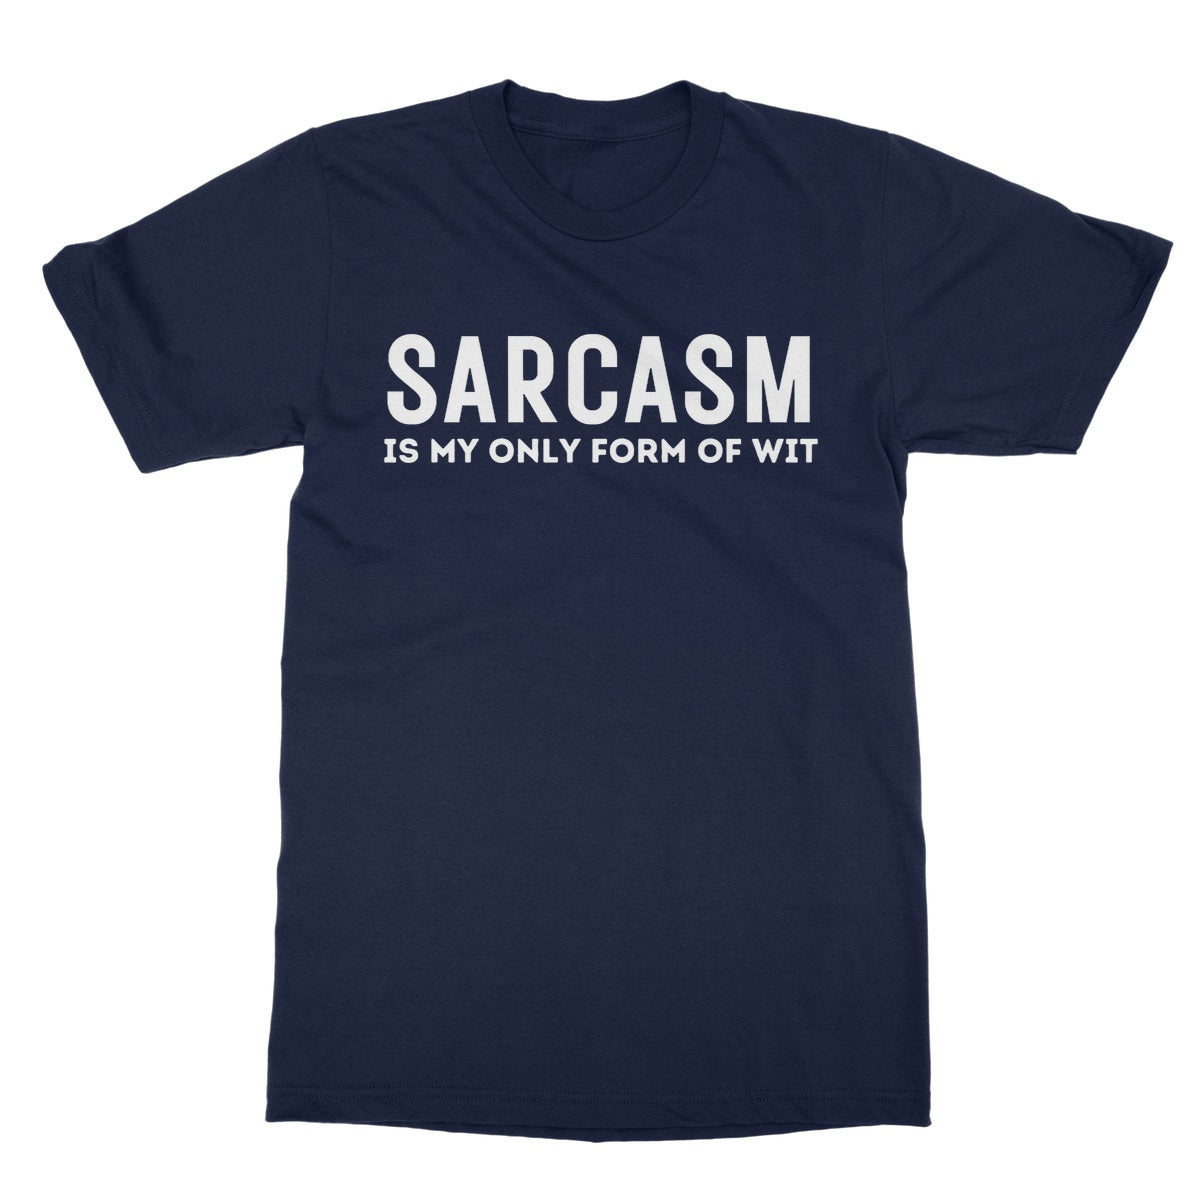 sarcasm is my only form of wit t shirt navy